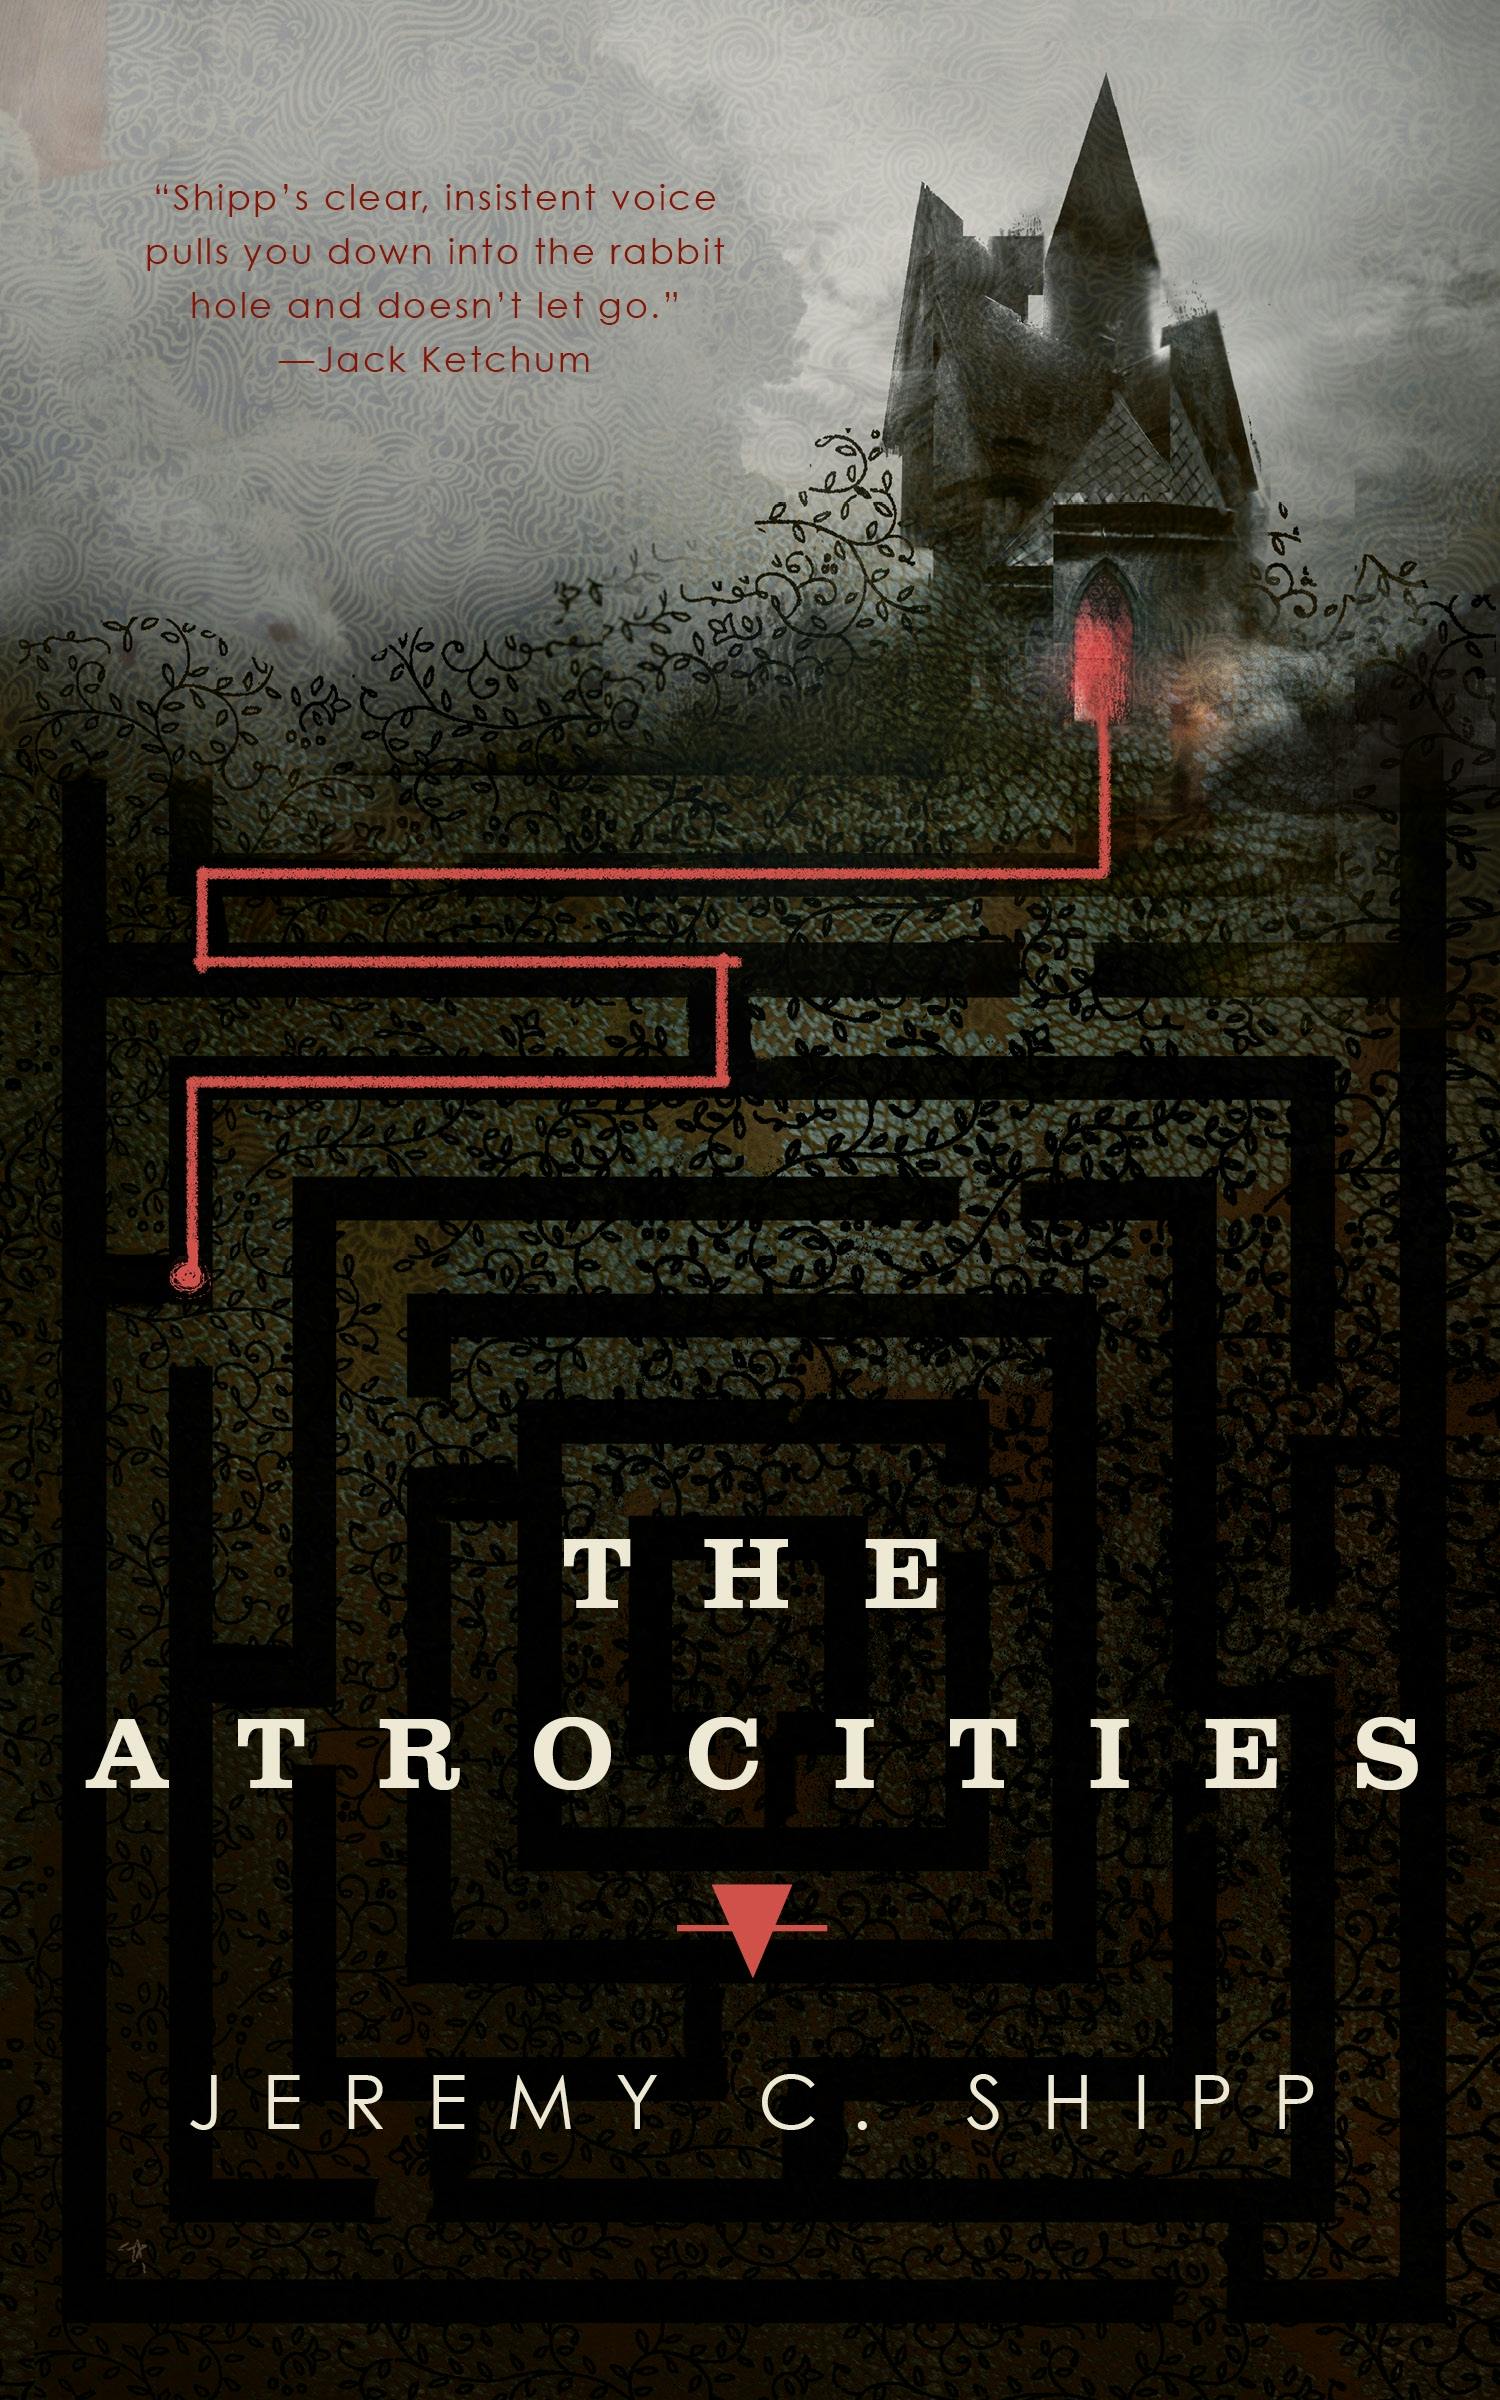 Cover for the book titled as: The Atrocities